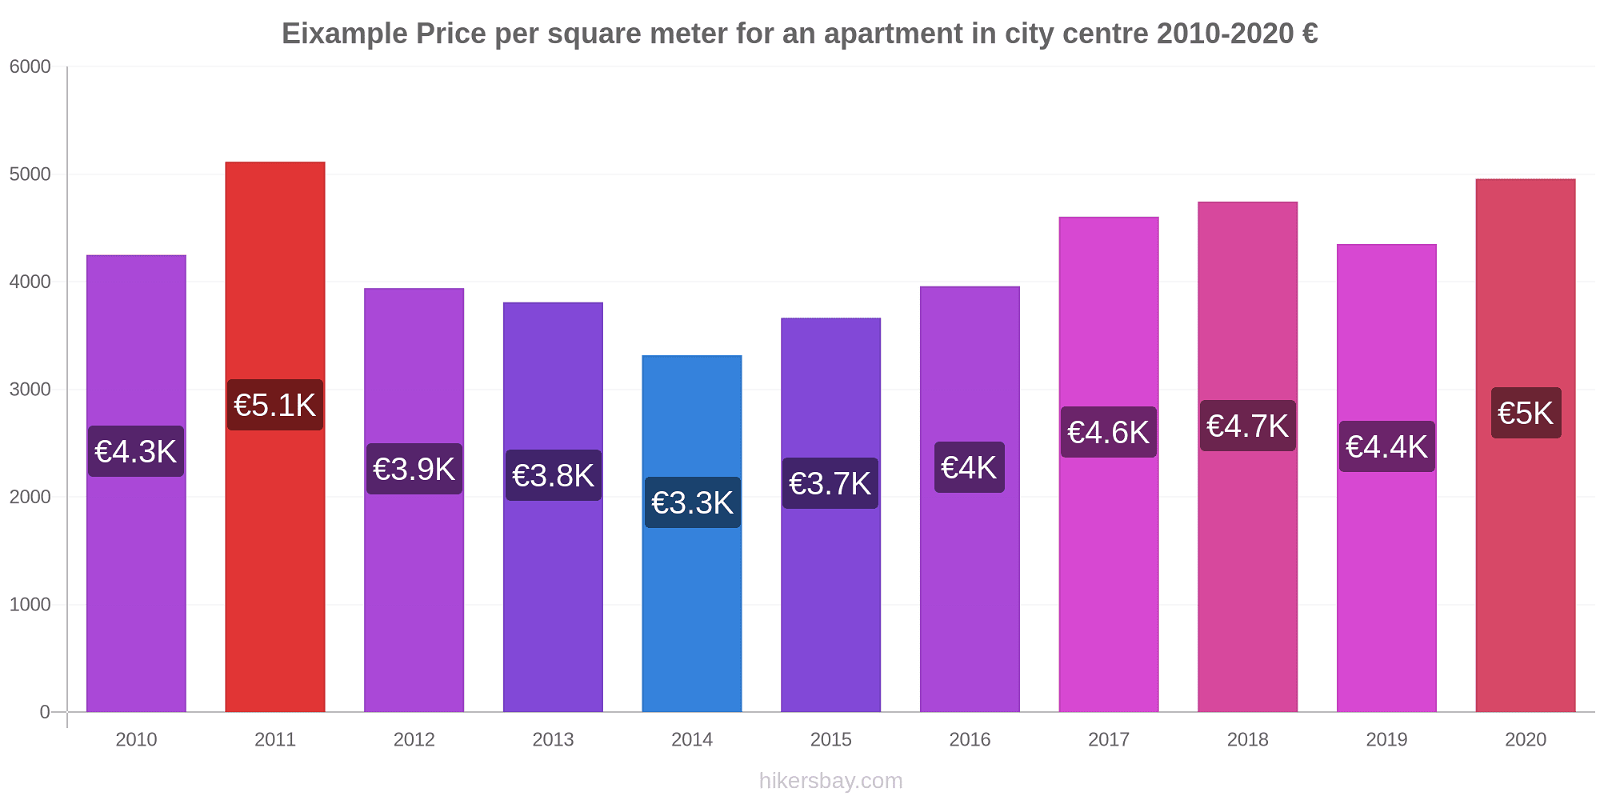 Eixample price changes Price per square meter for an apartment in city centre hikersbay.com